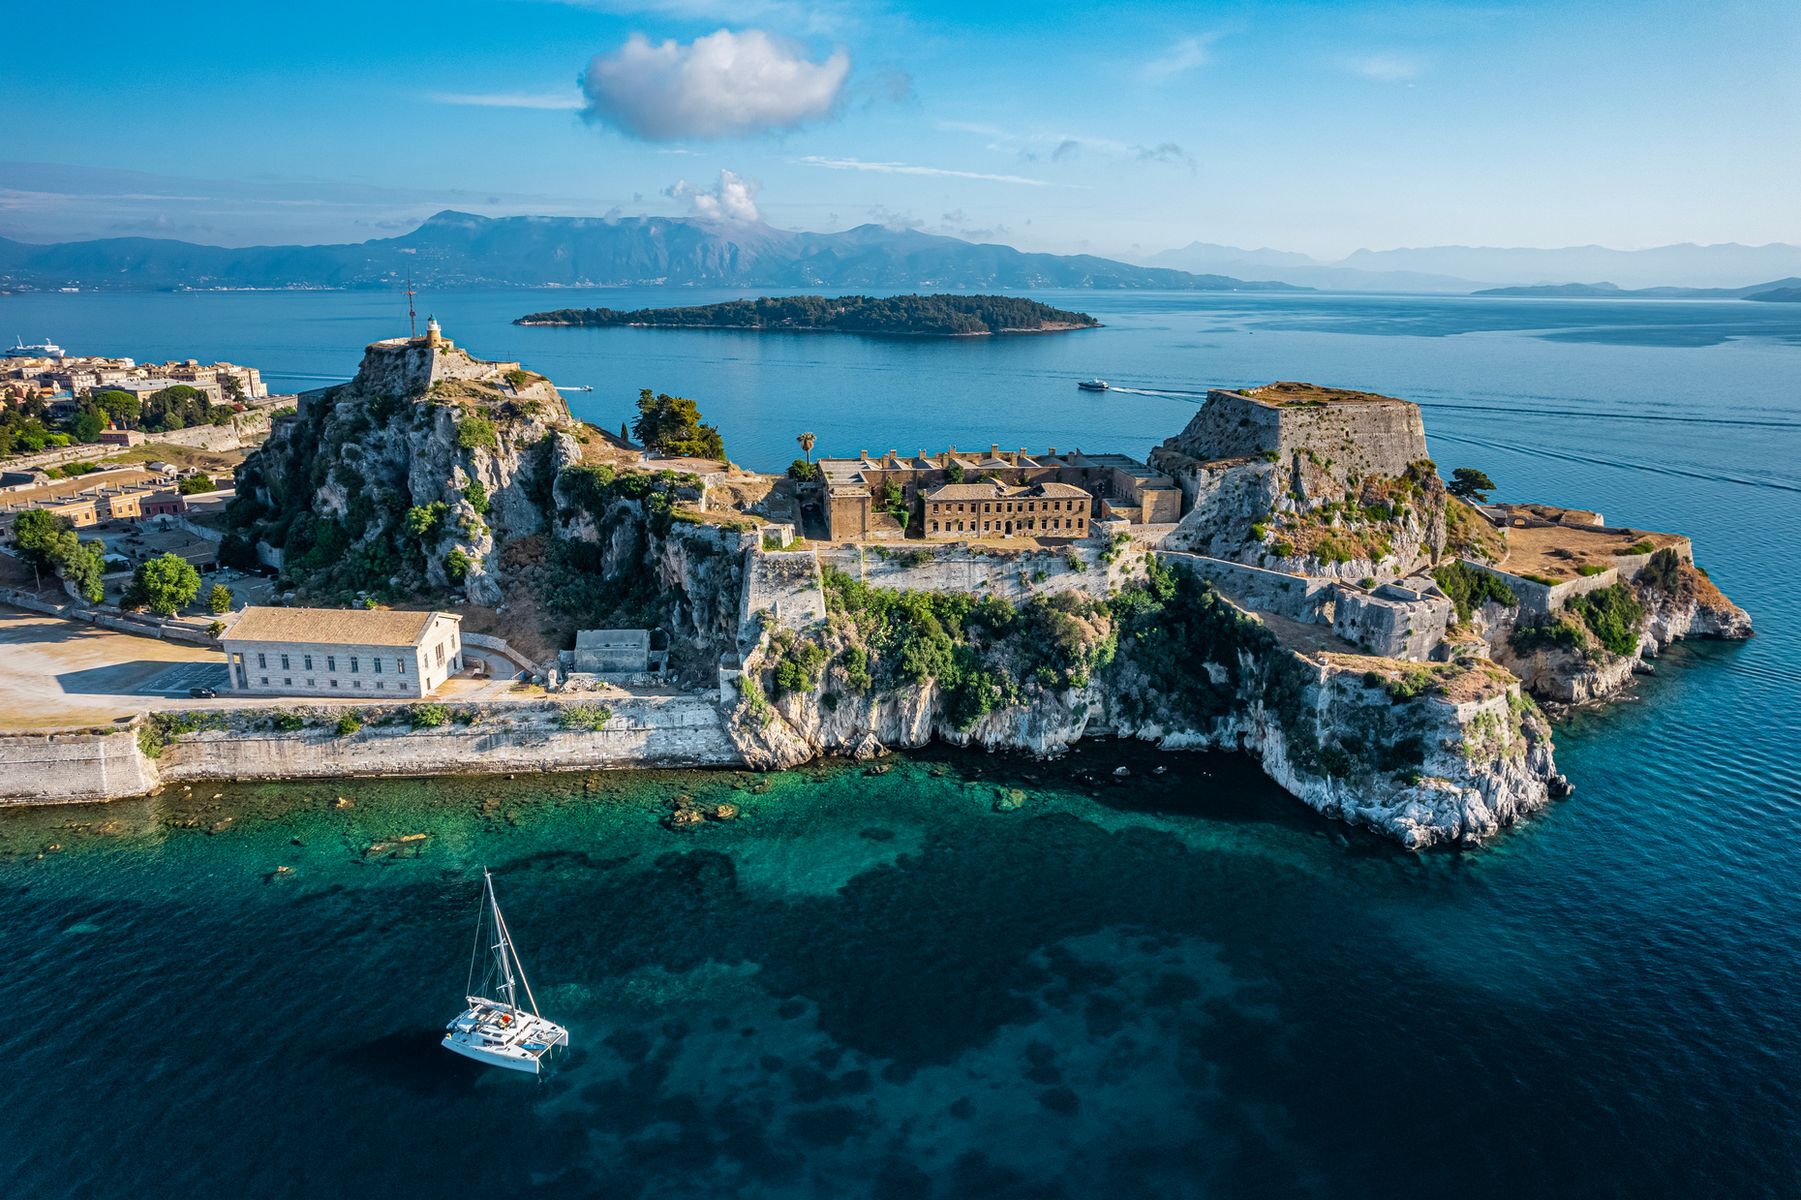 This <a href="https://www.discovergreece.com/ionian-islands/corfu" rel="noreferrer noopener">jewel</a> of the Ionian Sea entices travellers with its stunning sea views and romantic old town streets, listed as a <a href="https://whc.unesco.org/en/list/978/" rel="noreferrer noopener">UNESCO</a> World Heritage site. What’s more, Paleokastritsa and other idyllic beaches, alongside the island’s <a href="https://www.greeka.com/ionian/corfu/" rel="noreferrer noopener">colourful architecture</a> with Italian, French, and British influences, provide the perfect backdrop for a romantic getaway. It’ll make you wish time would stop.